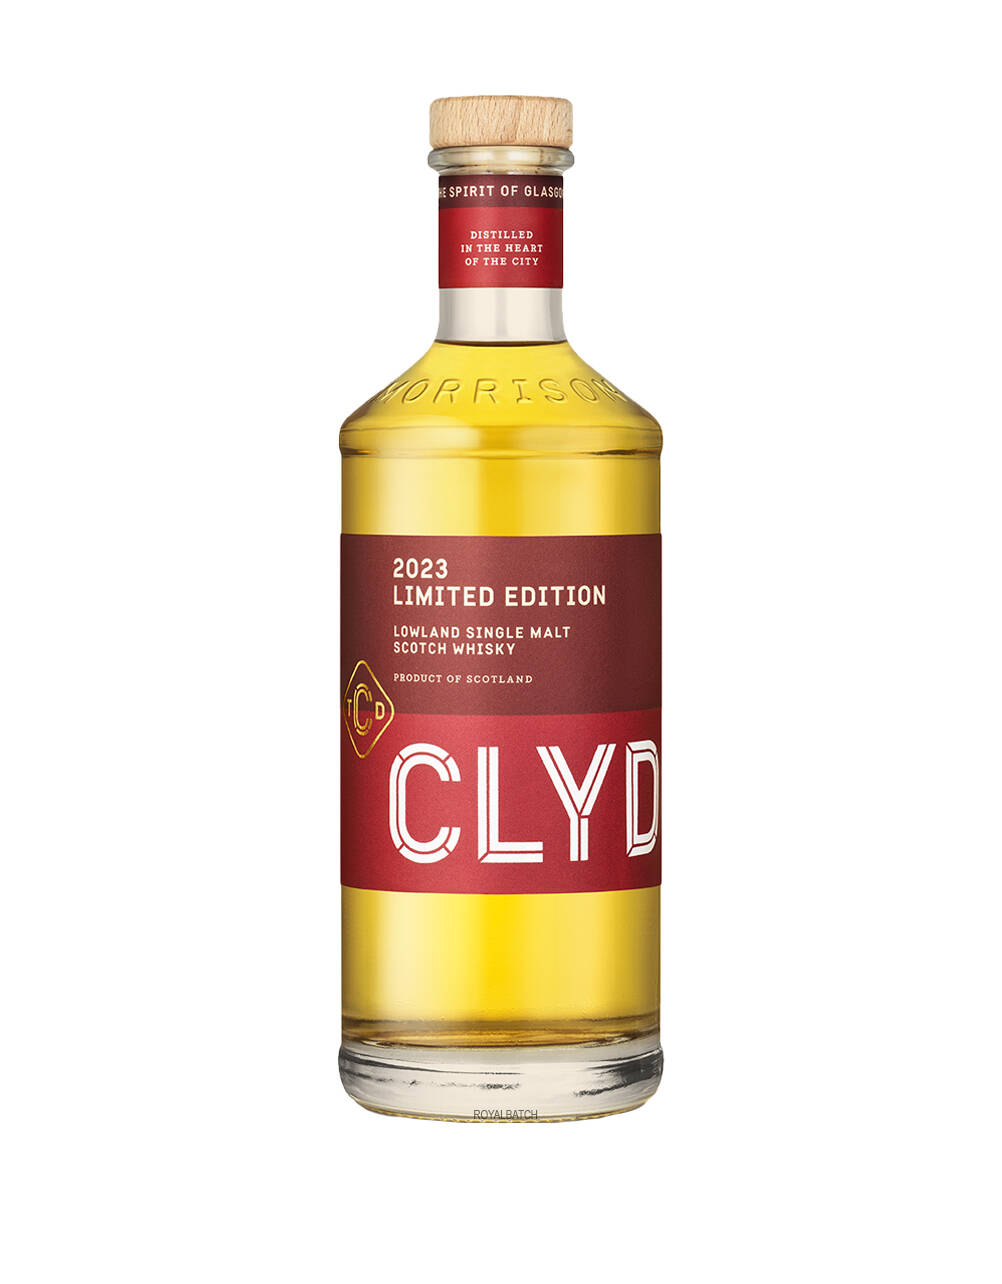 Clydeside Limited Edition Lowland Single Malt Scotch Whisky 2023